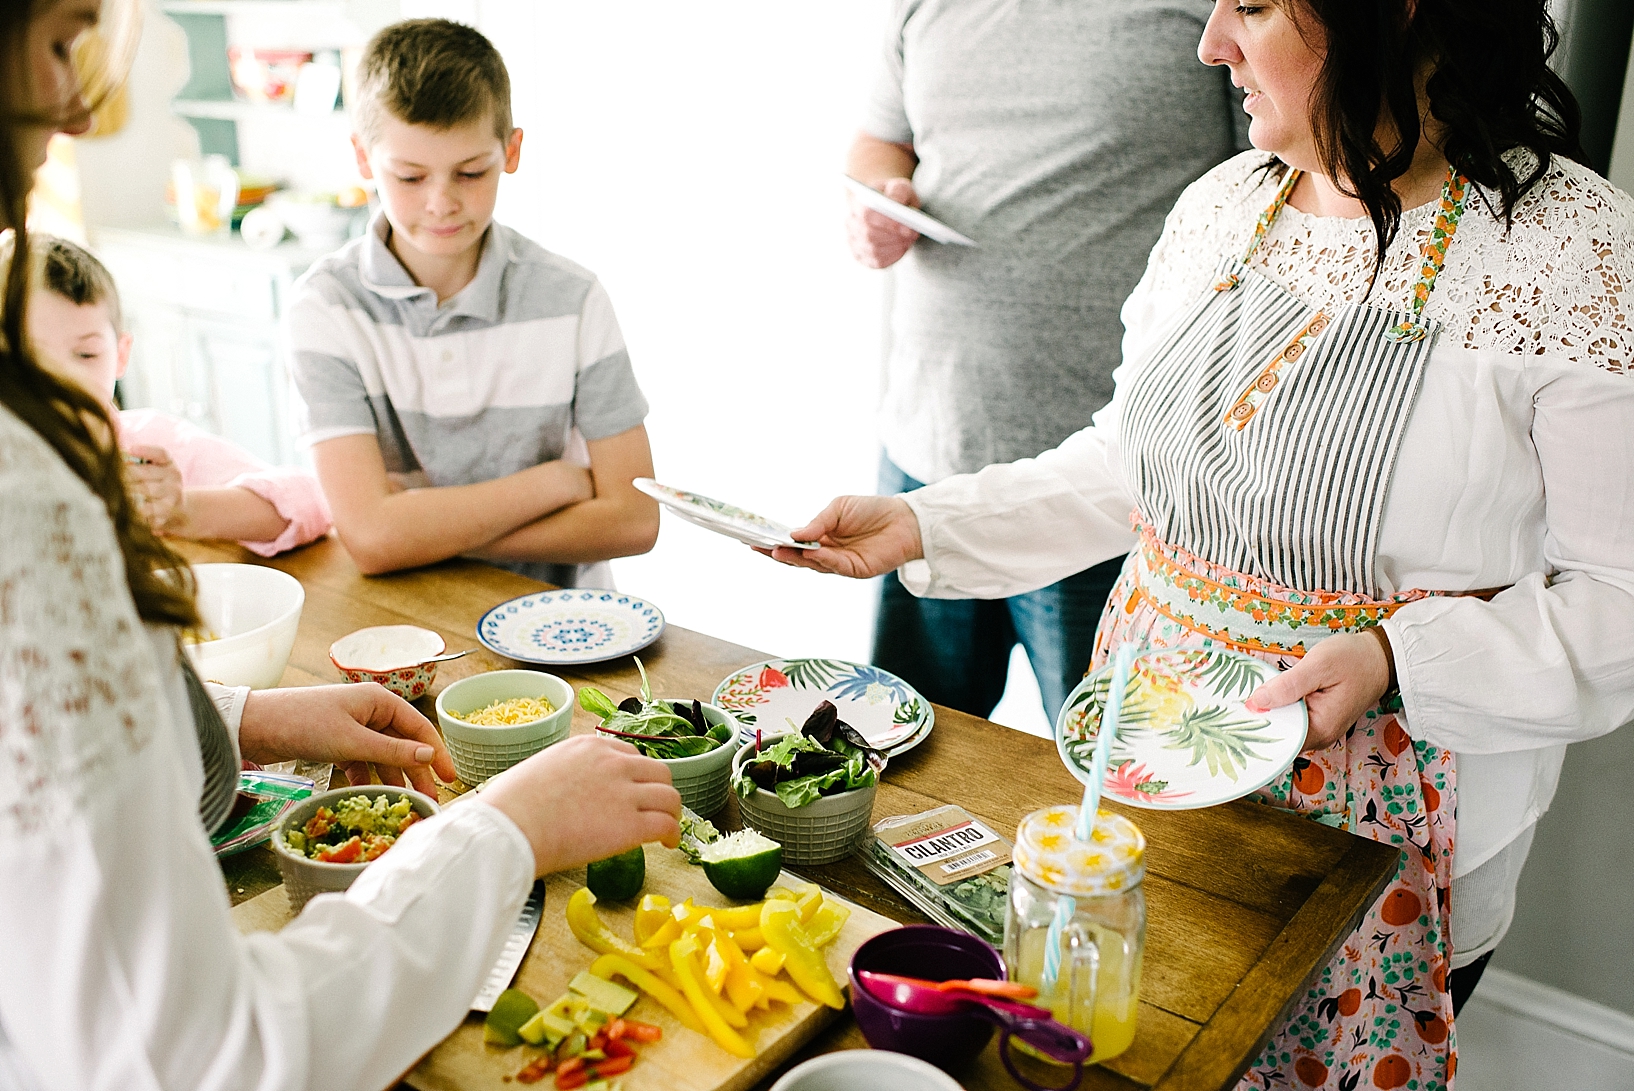 woman wearing patterned apron handing out plates to family members for dinner